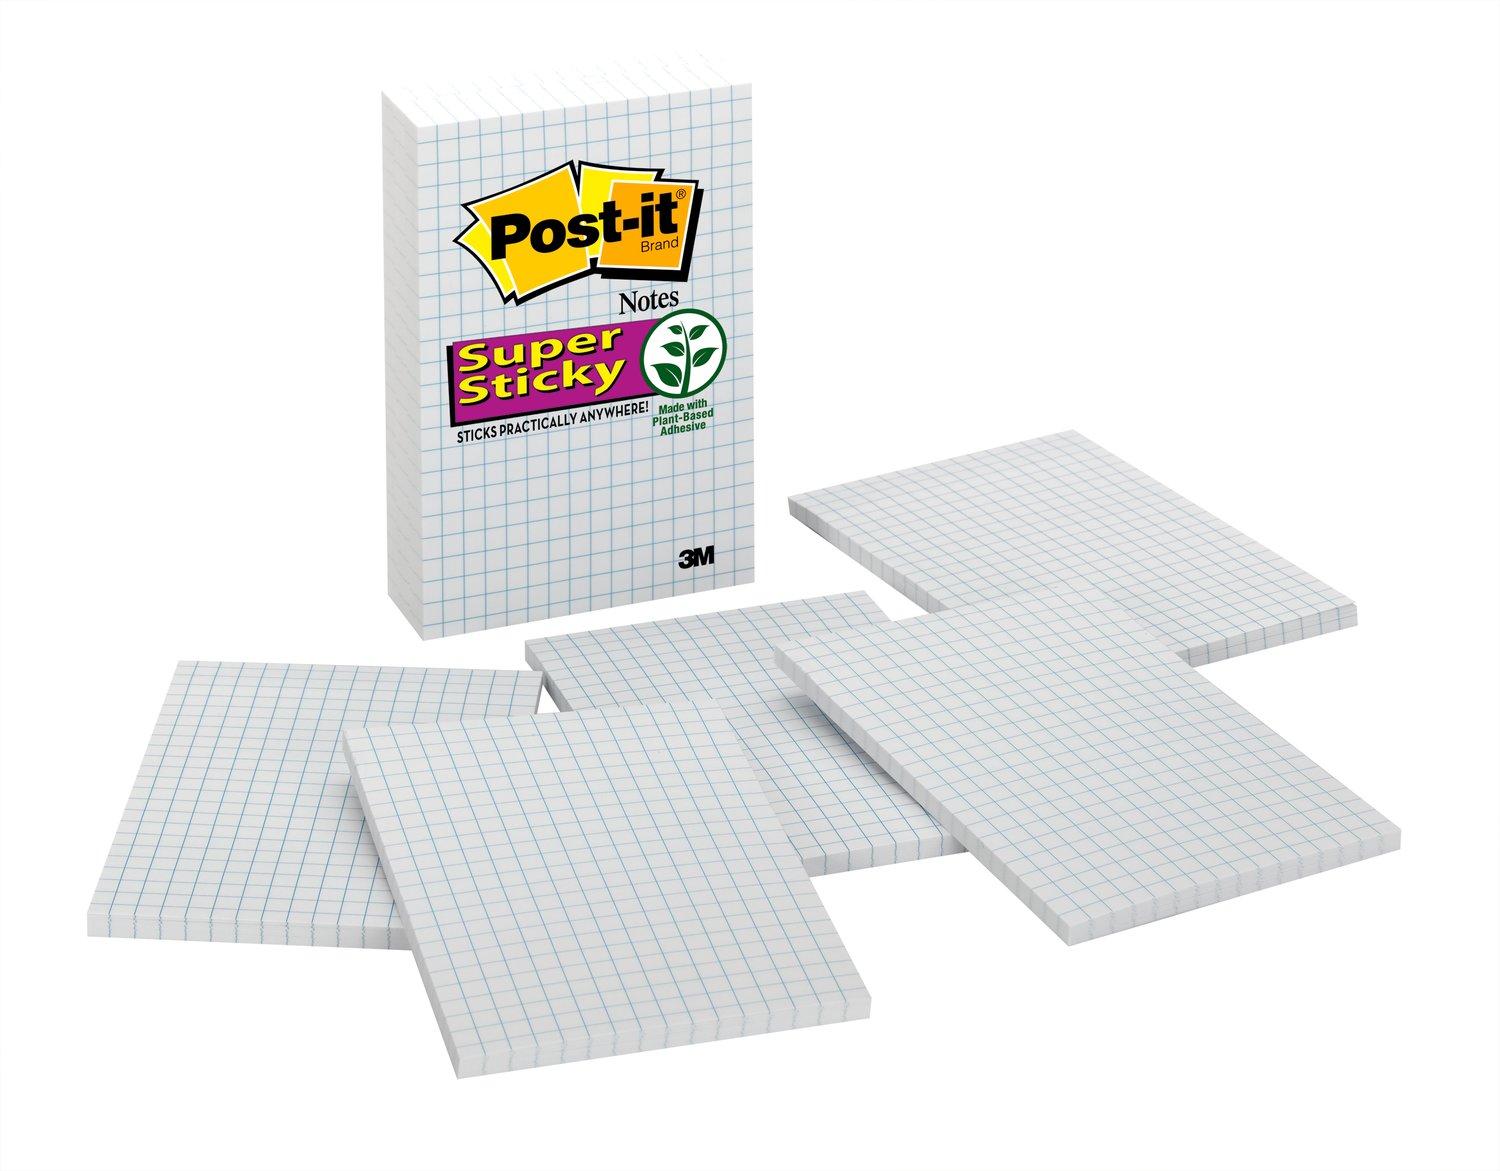 7010332623 - Post-it Super Sticky Notes 660-SSGRID, 3.9 in x 5.8 in (99 mm x 147 mm)
Grid Pattern, 3 Pads/Pack